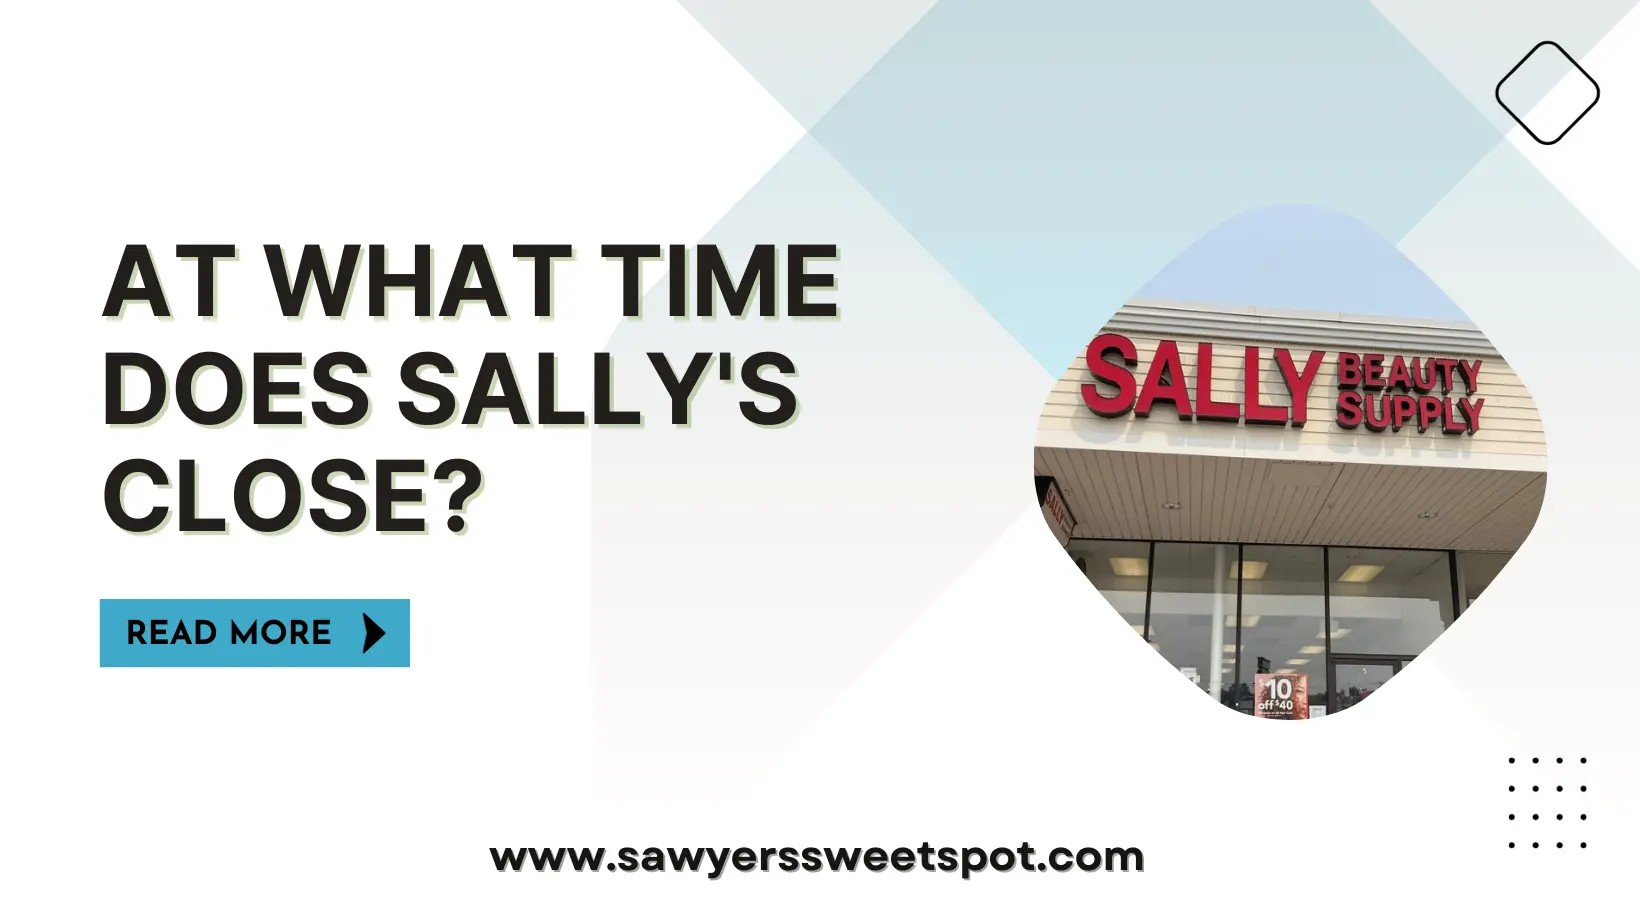 At What Time Does Sally's Close?